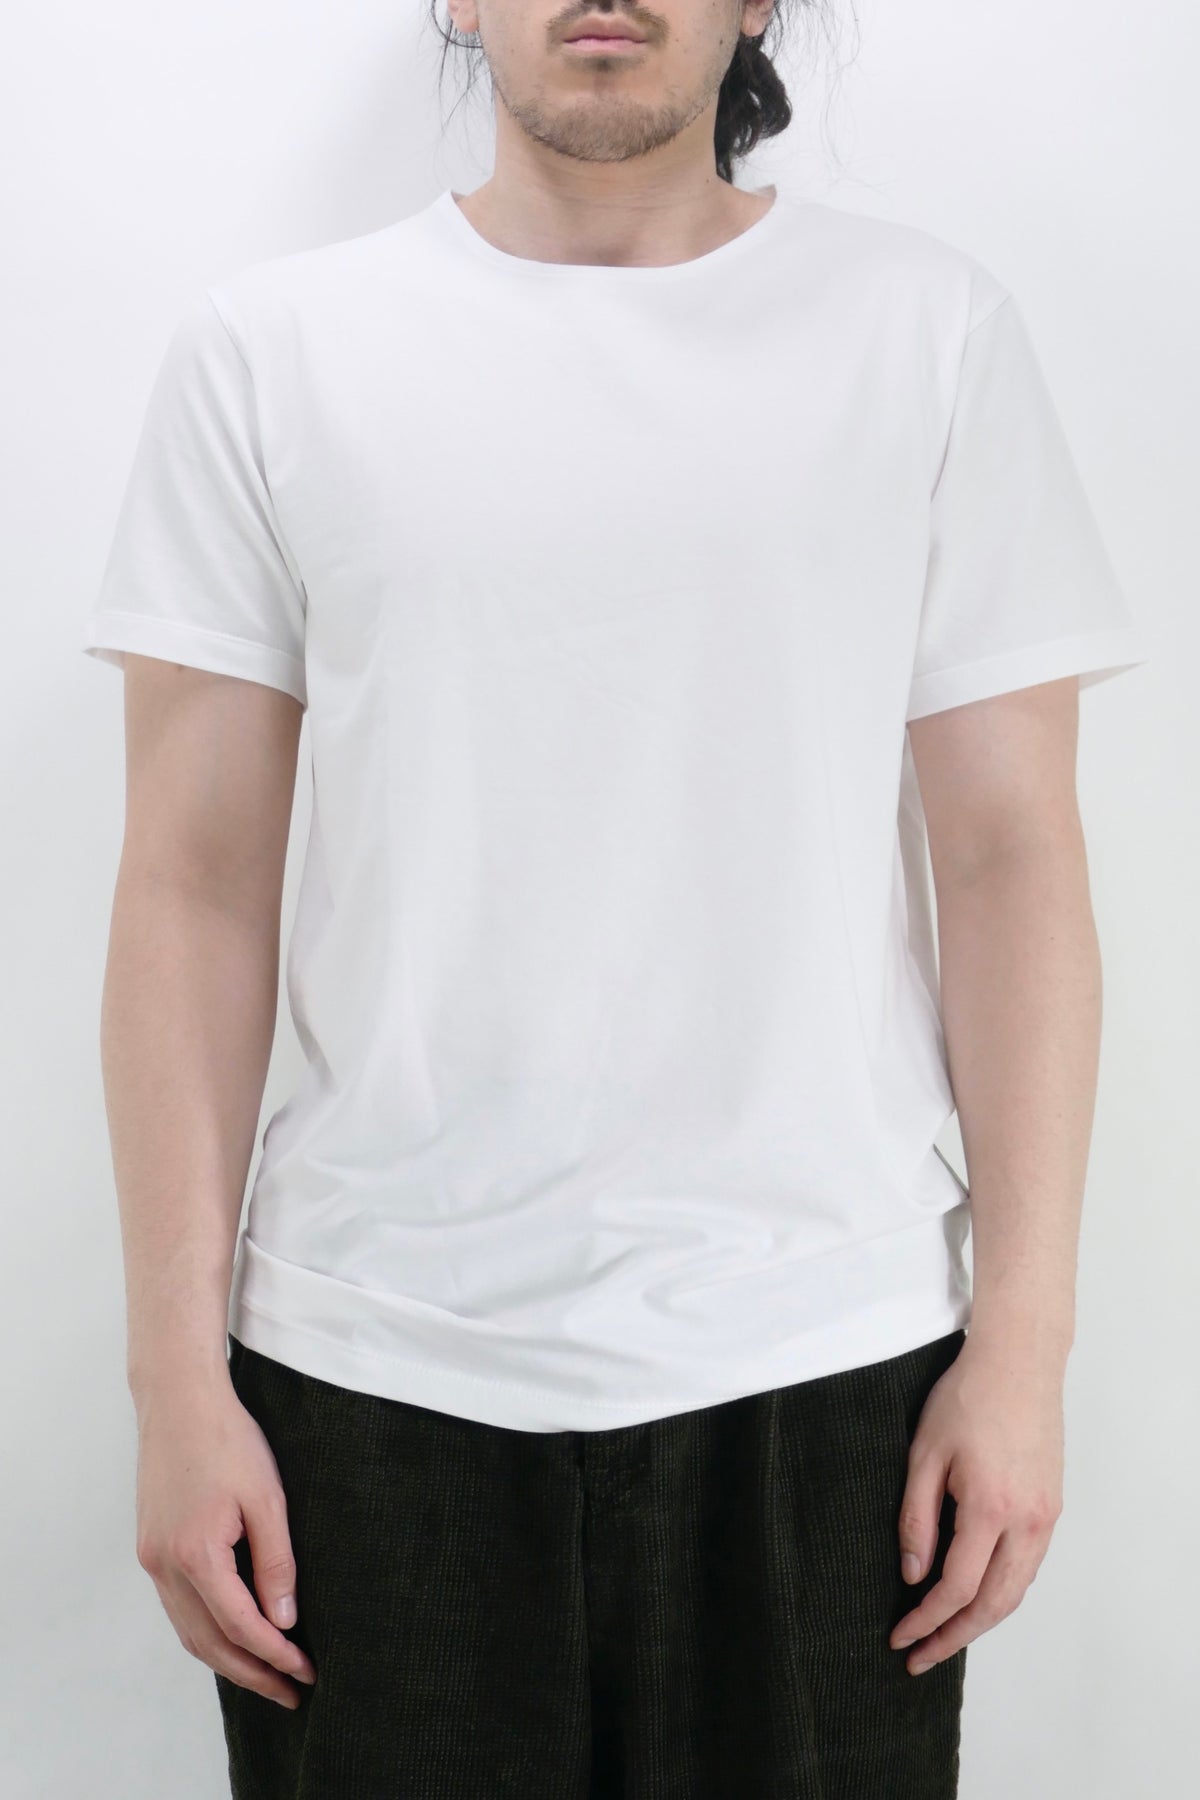 ASRV 0632 Soulcell™ Essential Tee - White